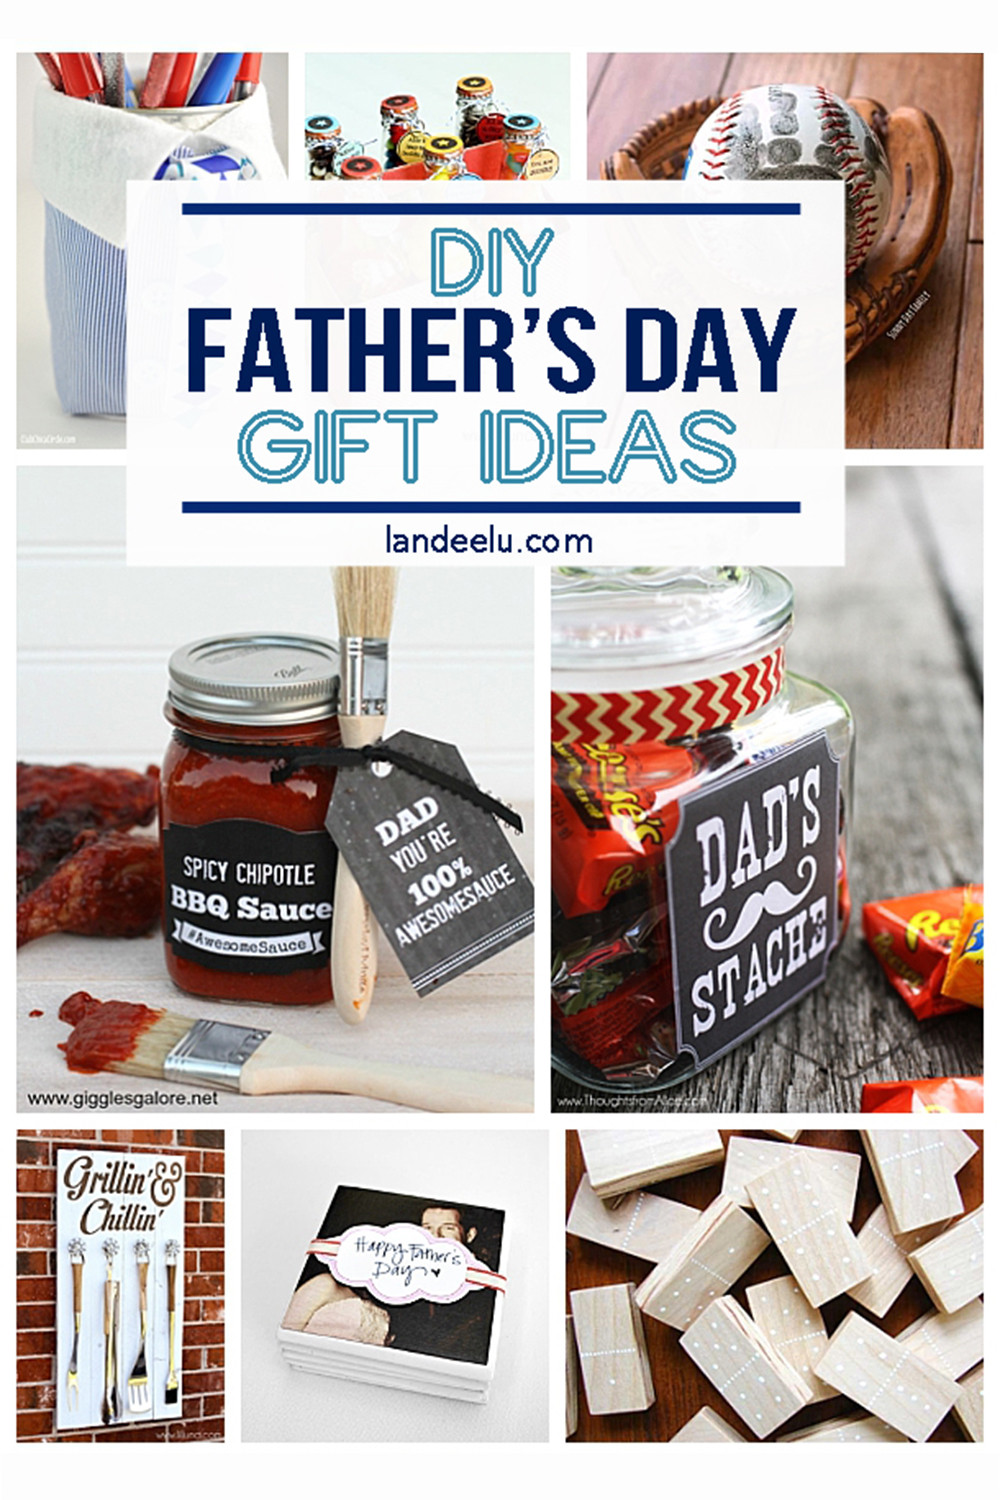 DIY Fathers Day Gifts
 21 DIY Father s Day Gifts to Celebrate Dad landeelu